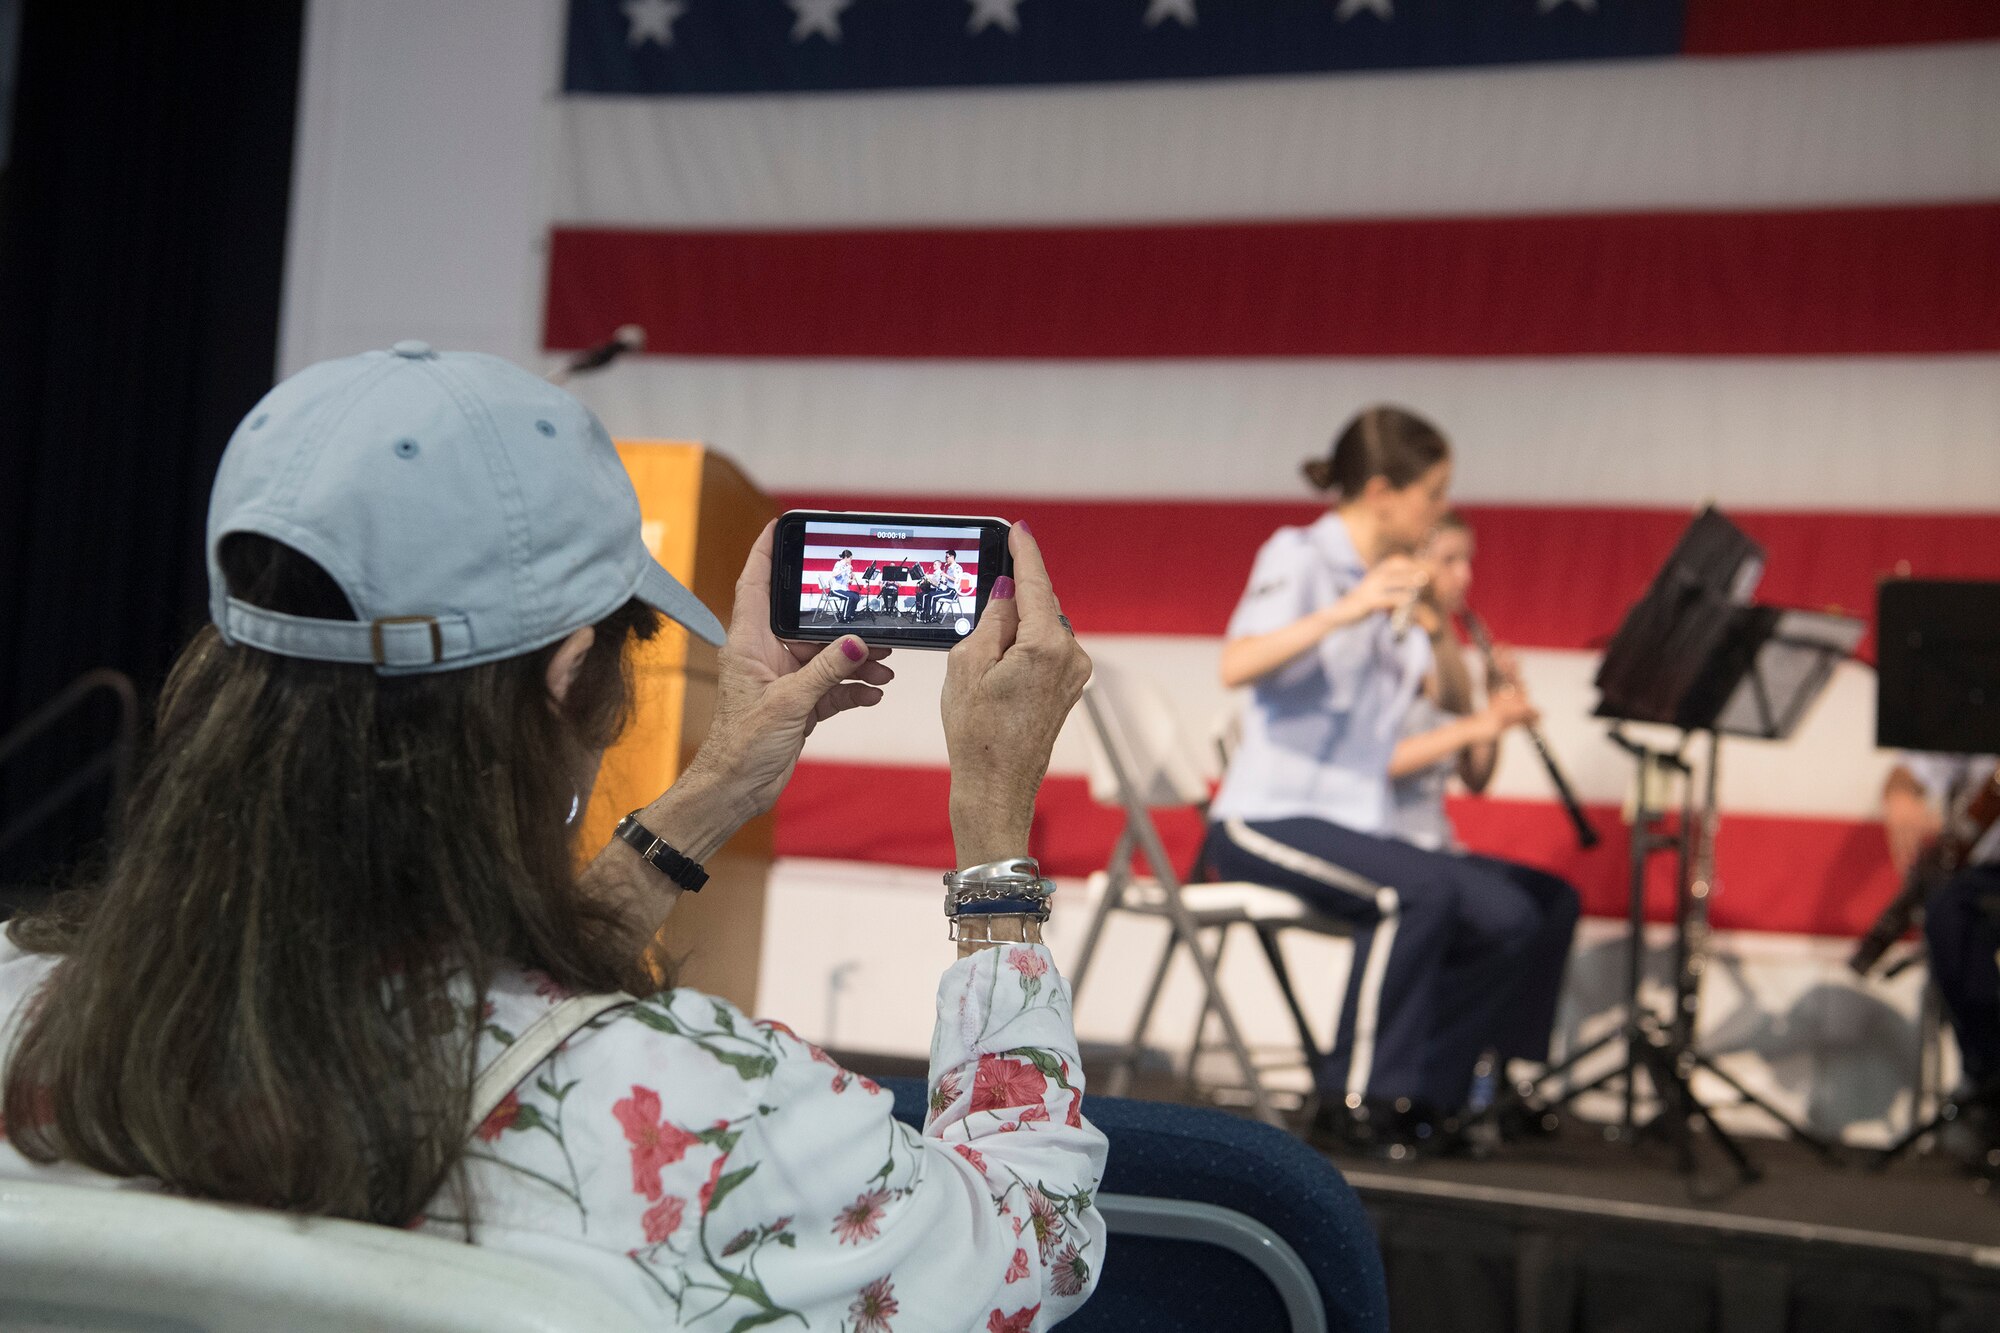 Delores Goodwin, retired teacher and audience member, takes a video of the U.S. Air Force Heritage Winds June 6th, 2019, in Mount Pleasant, S.C.